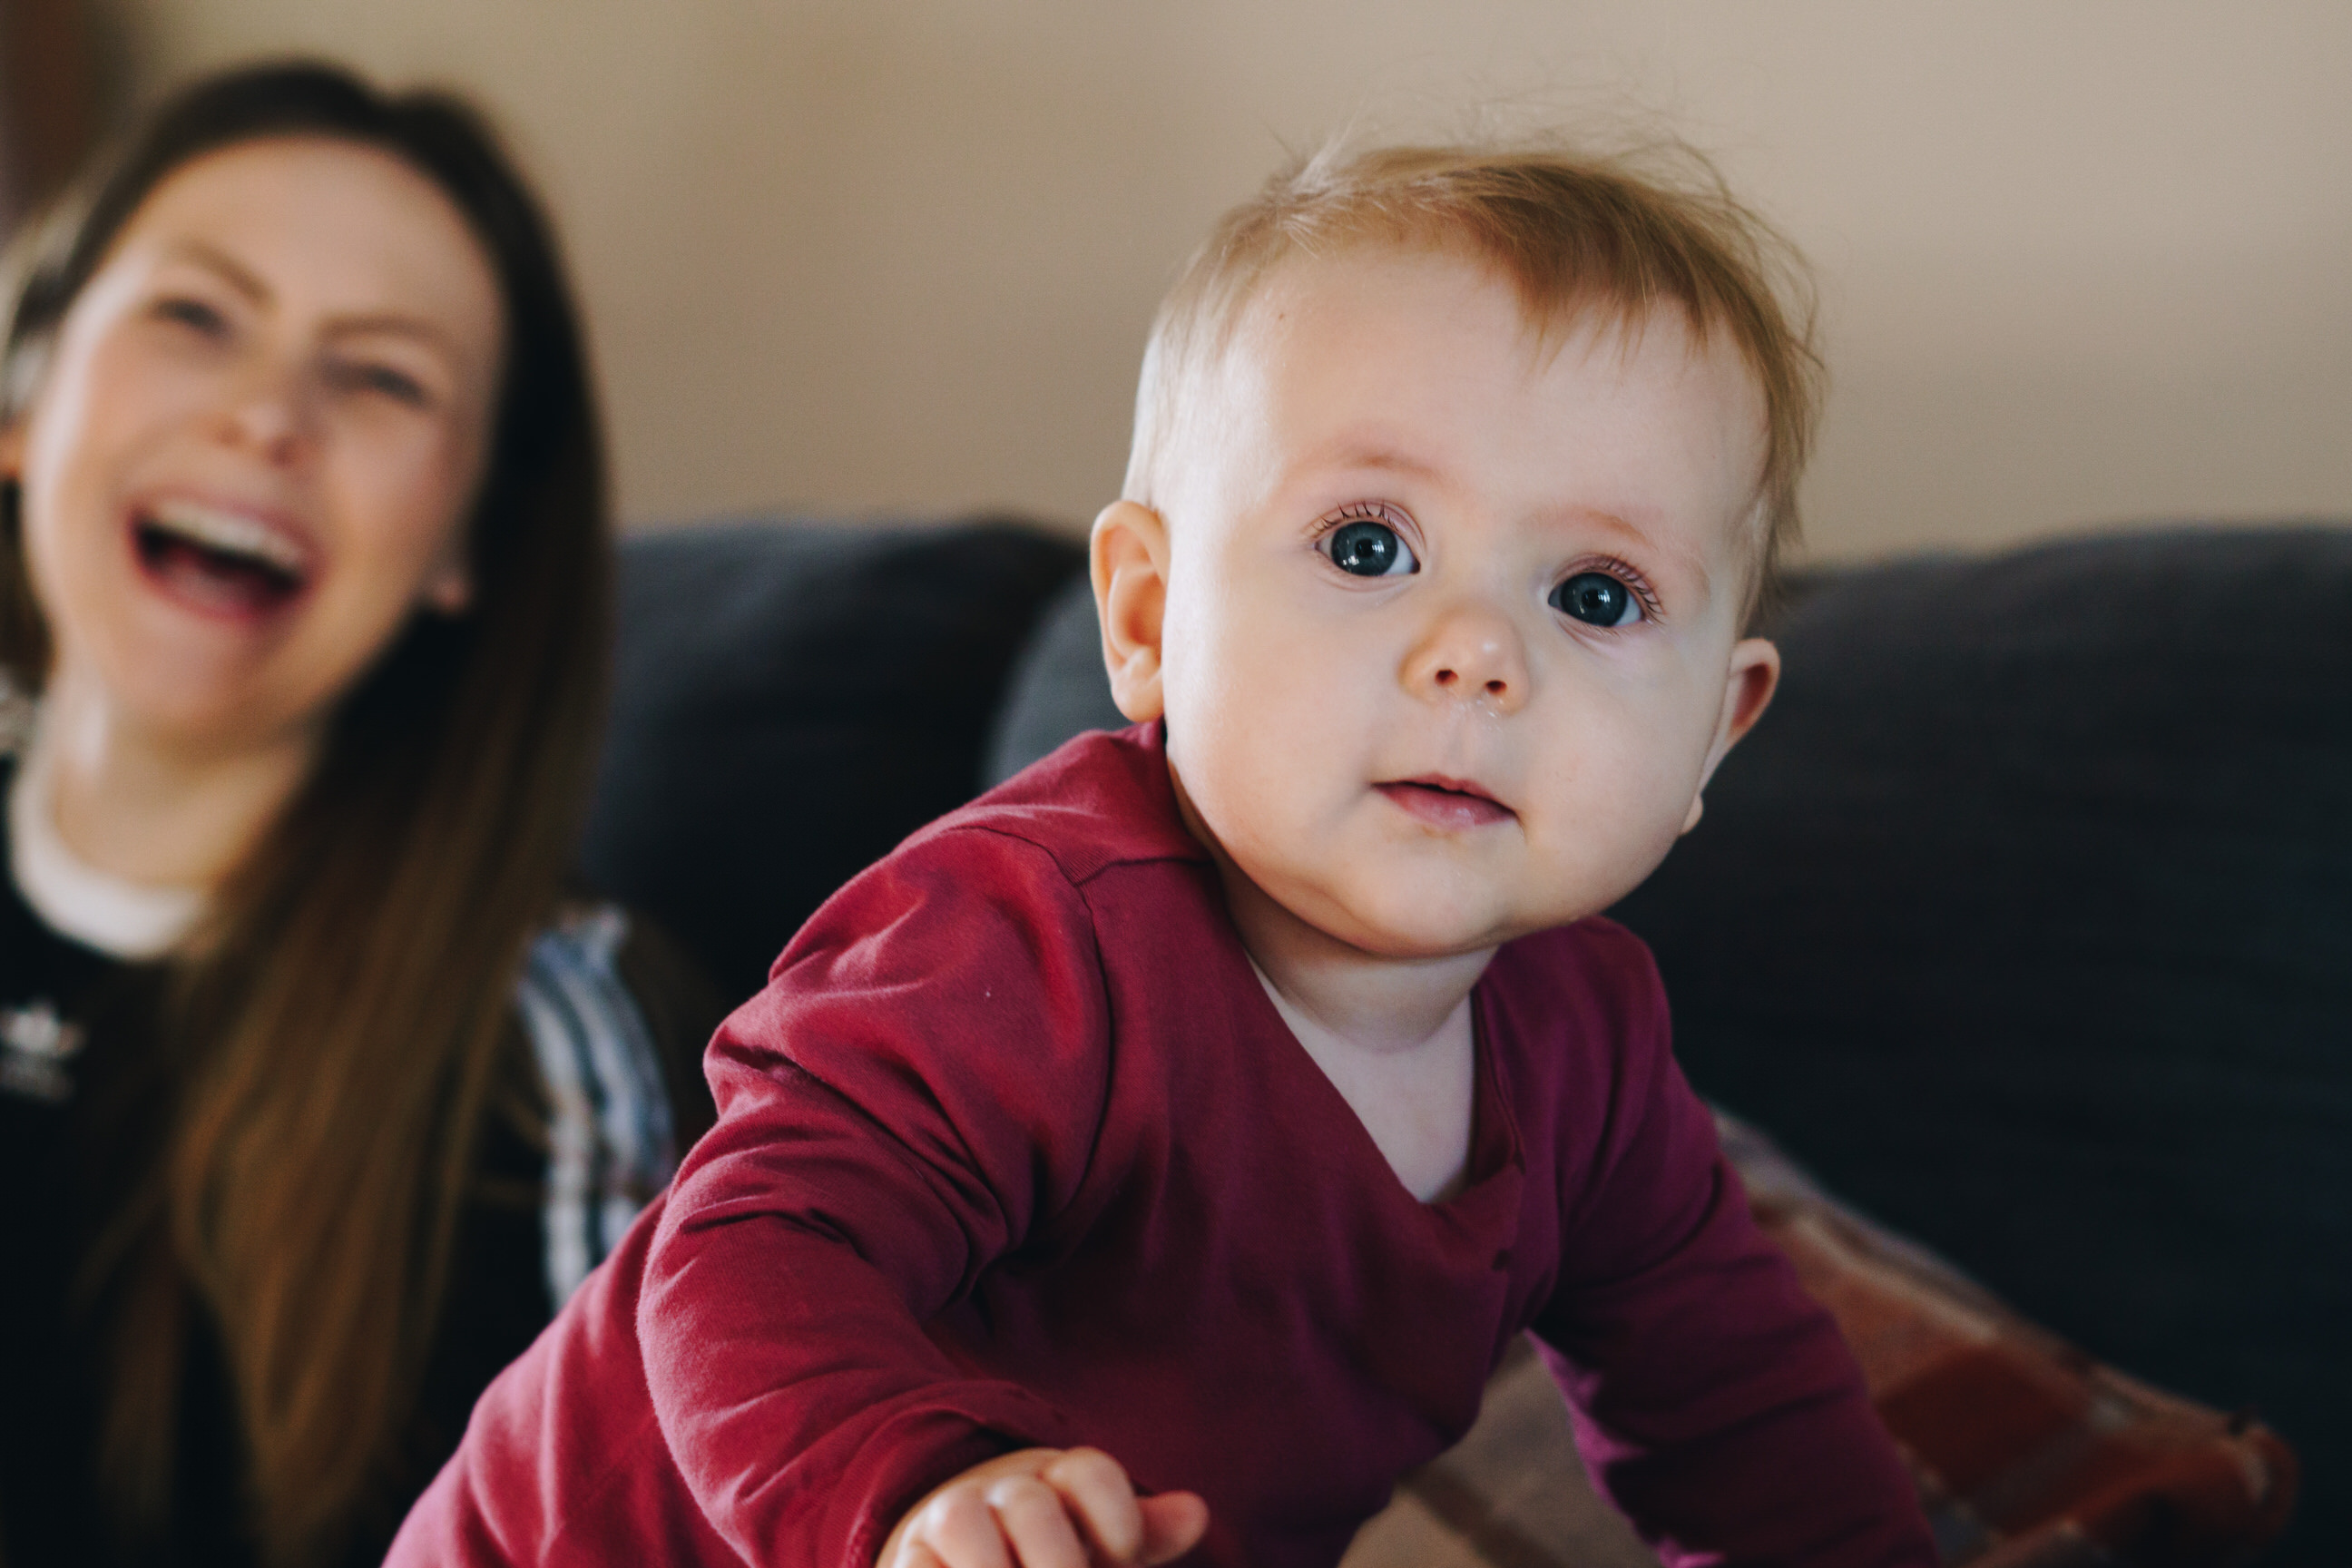 a baby girl leans towards the camera with her big blue eyes and her mum is seen laughing at her in the background during a home family photo shoot near Lancashire